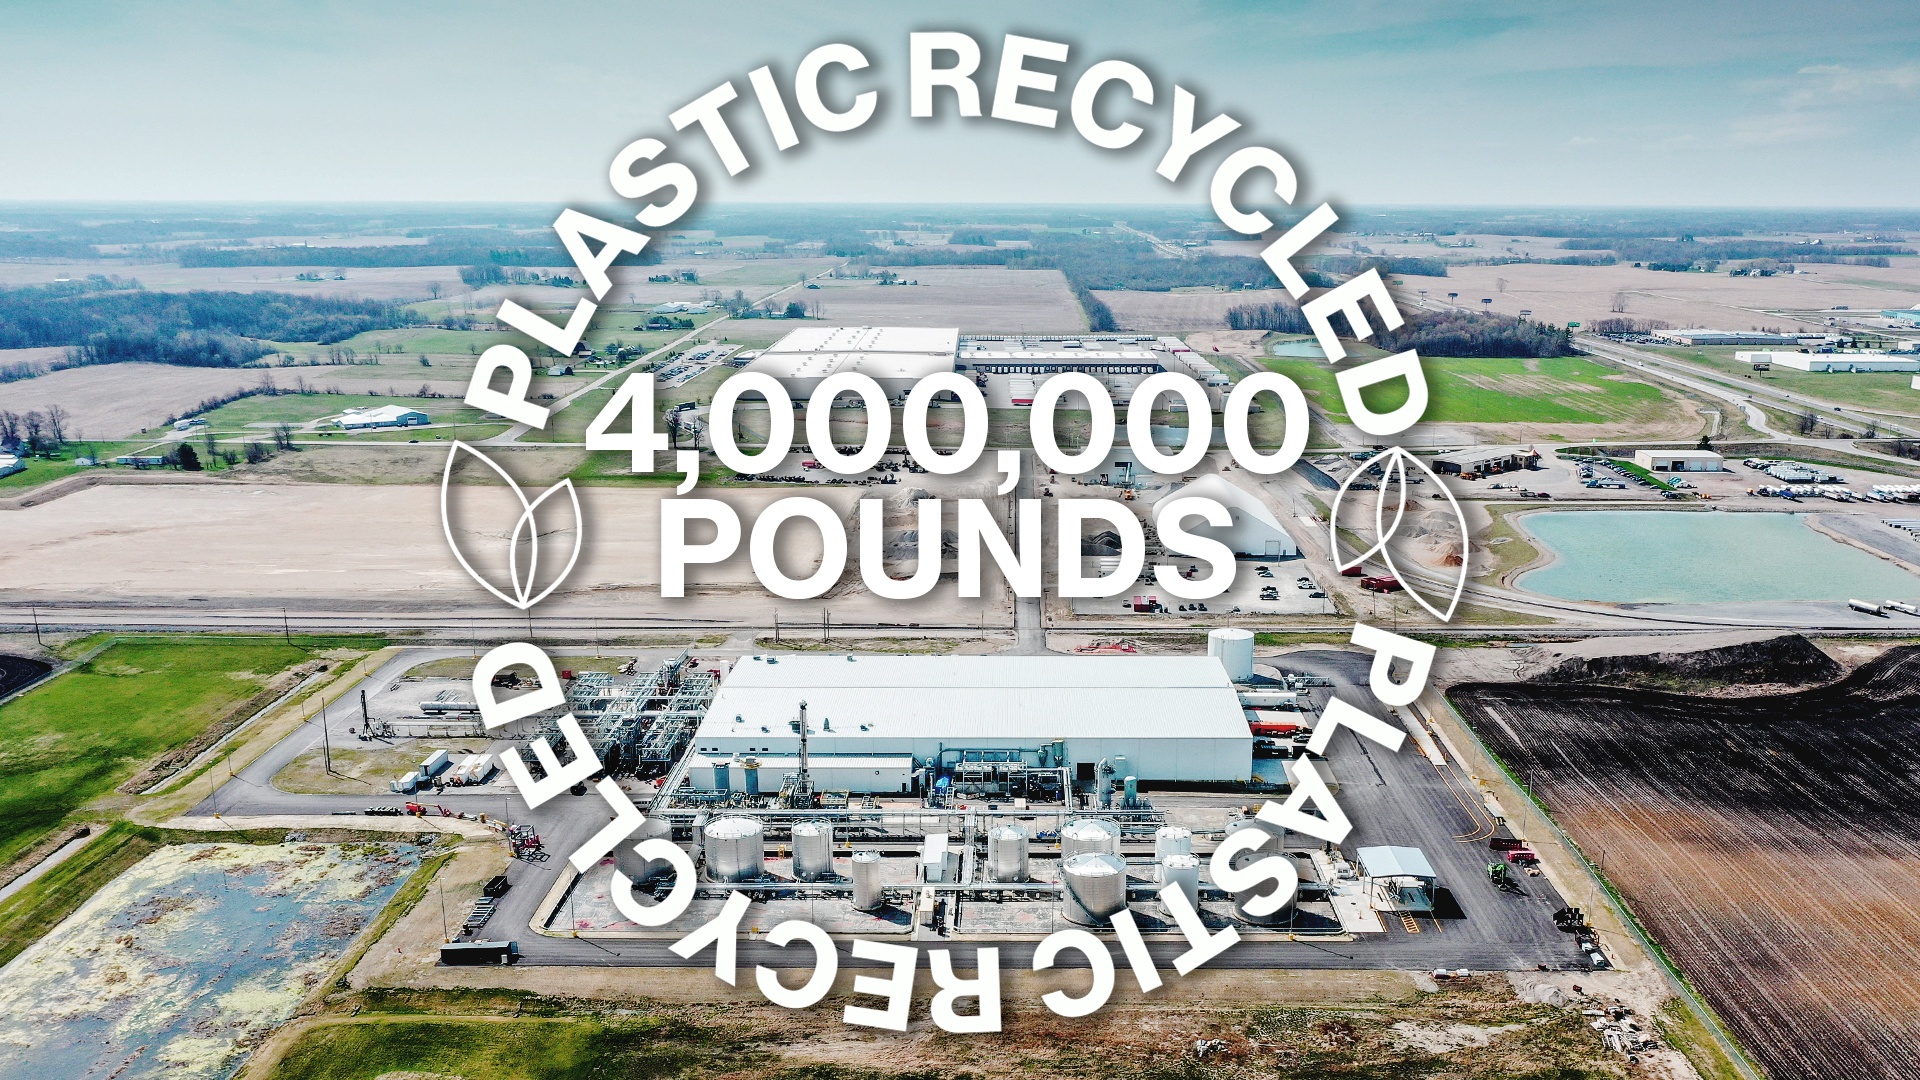 "4 Million Pounds of Plastic Recycled"